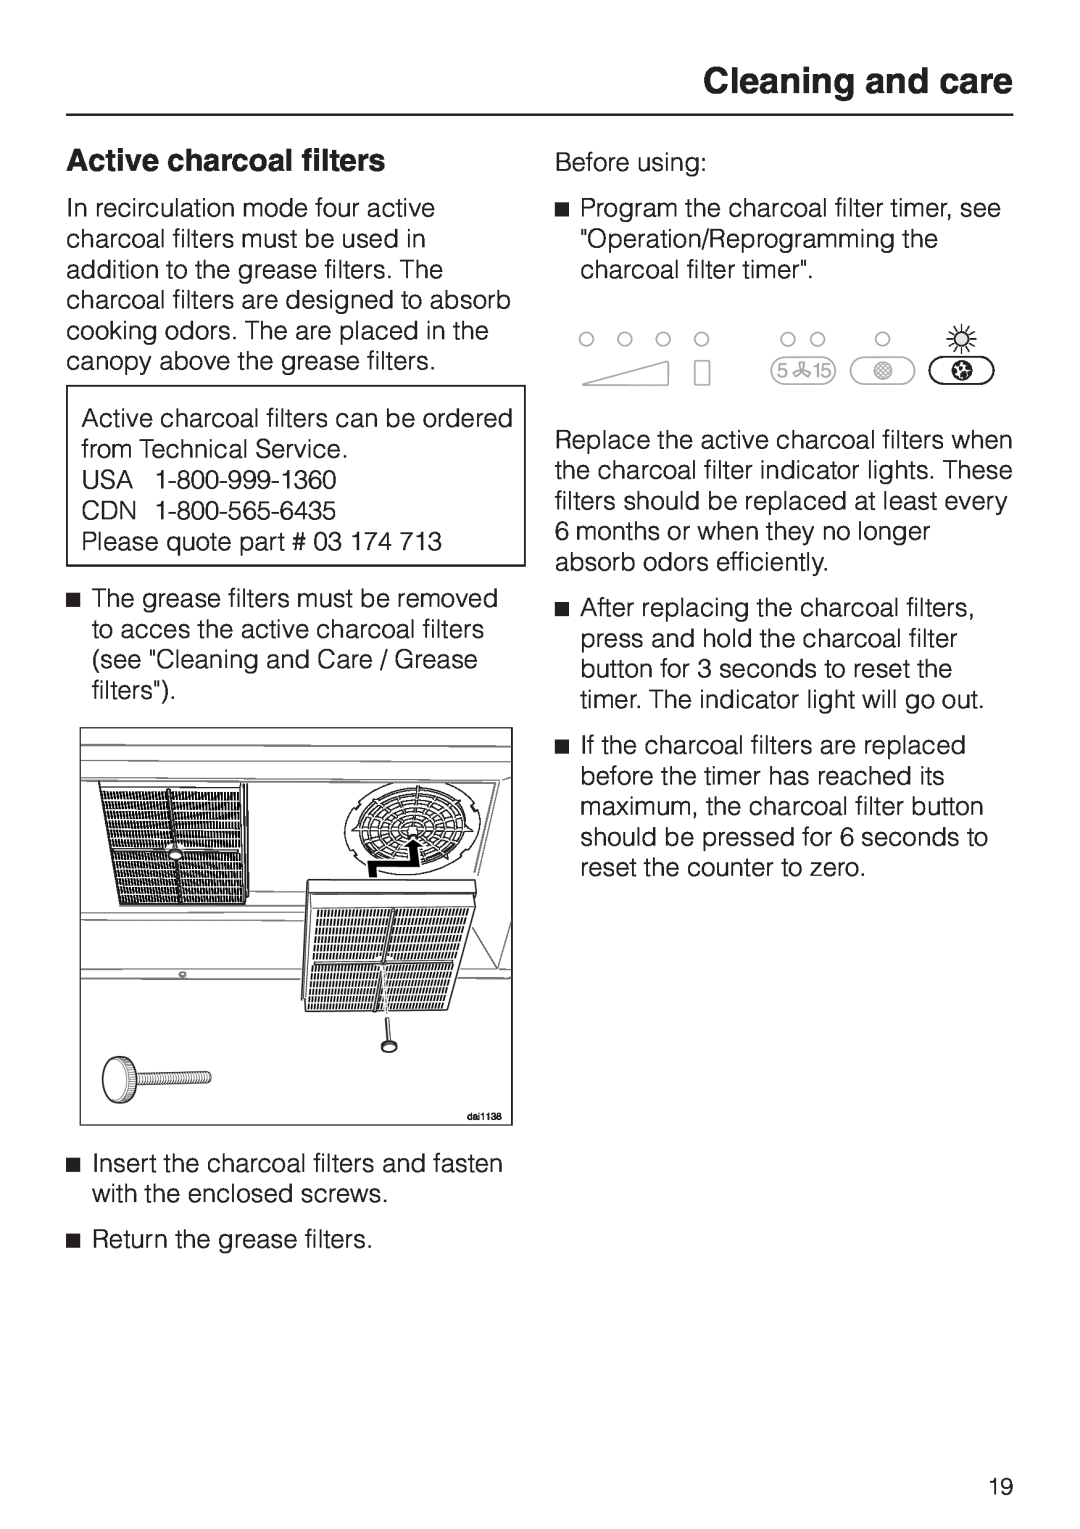 Miele DA362-110 installation instructions Active charcoal filters, Cleaning and care 